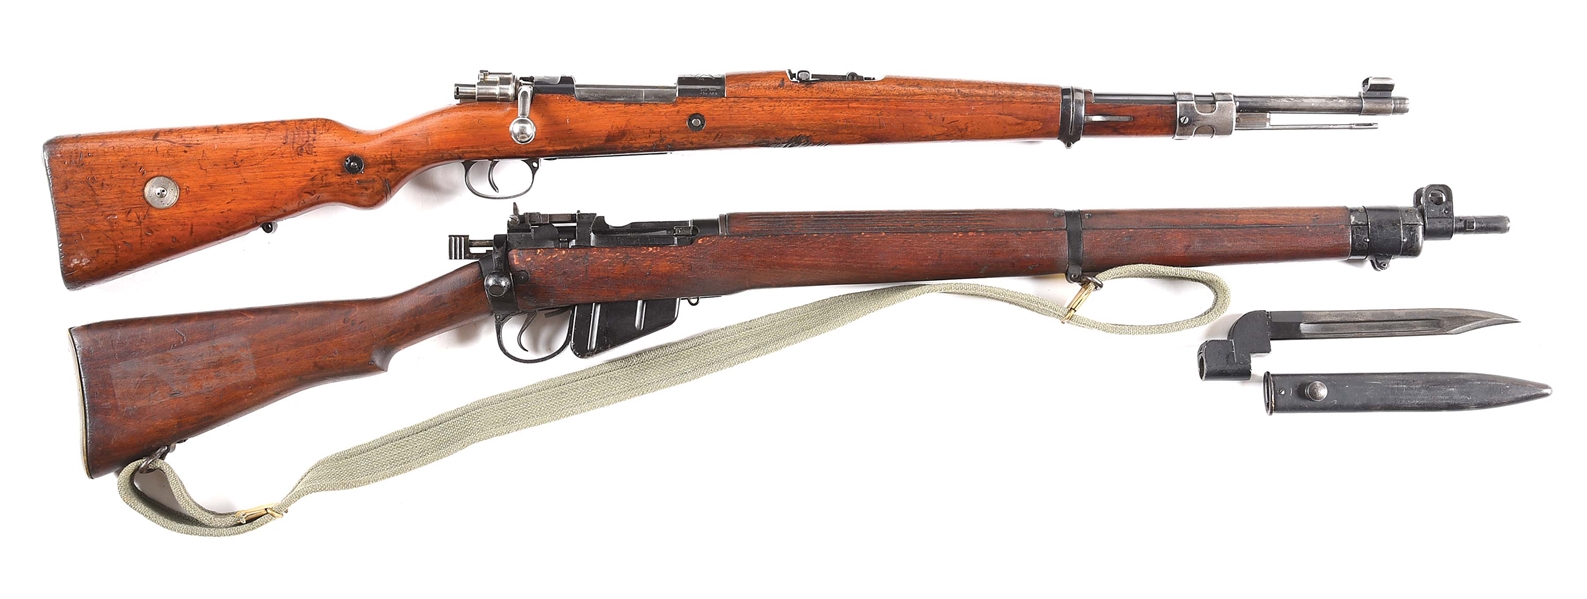 (C) LOT OF TWO: CHILEAN MAUSER MODEL 1935 & FAZAKERLEY NO. 4 MK I BOLT ACTION RIFLES.